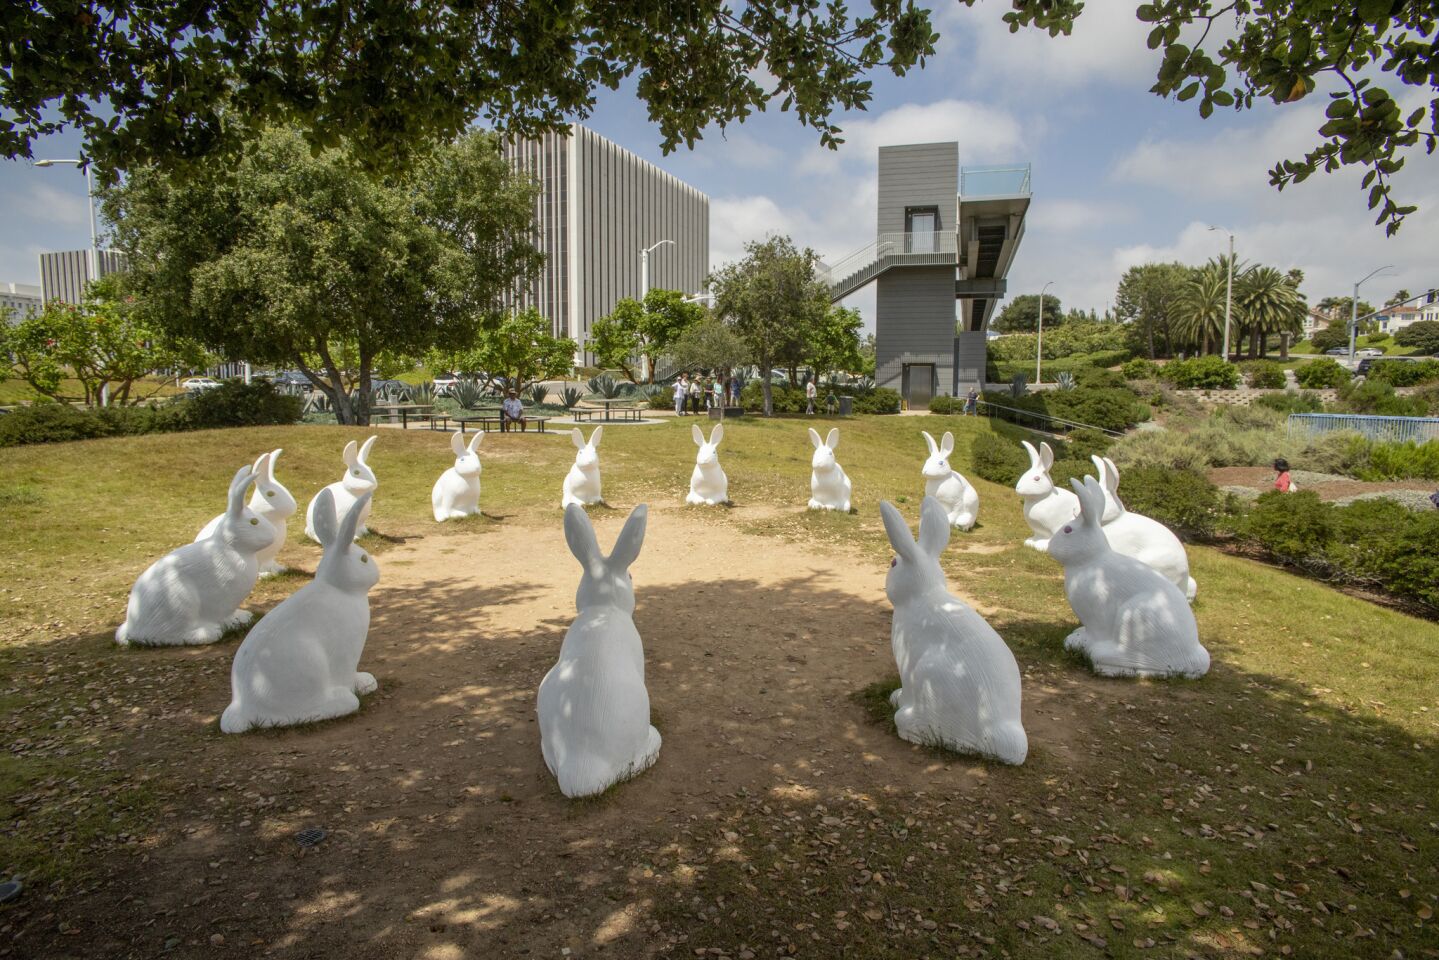 A bevy of bunnies were supplied by Peter Miller Associates, designer of the sculpture garden. (Photo by Spencer Grant)